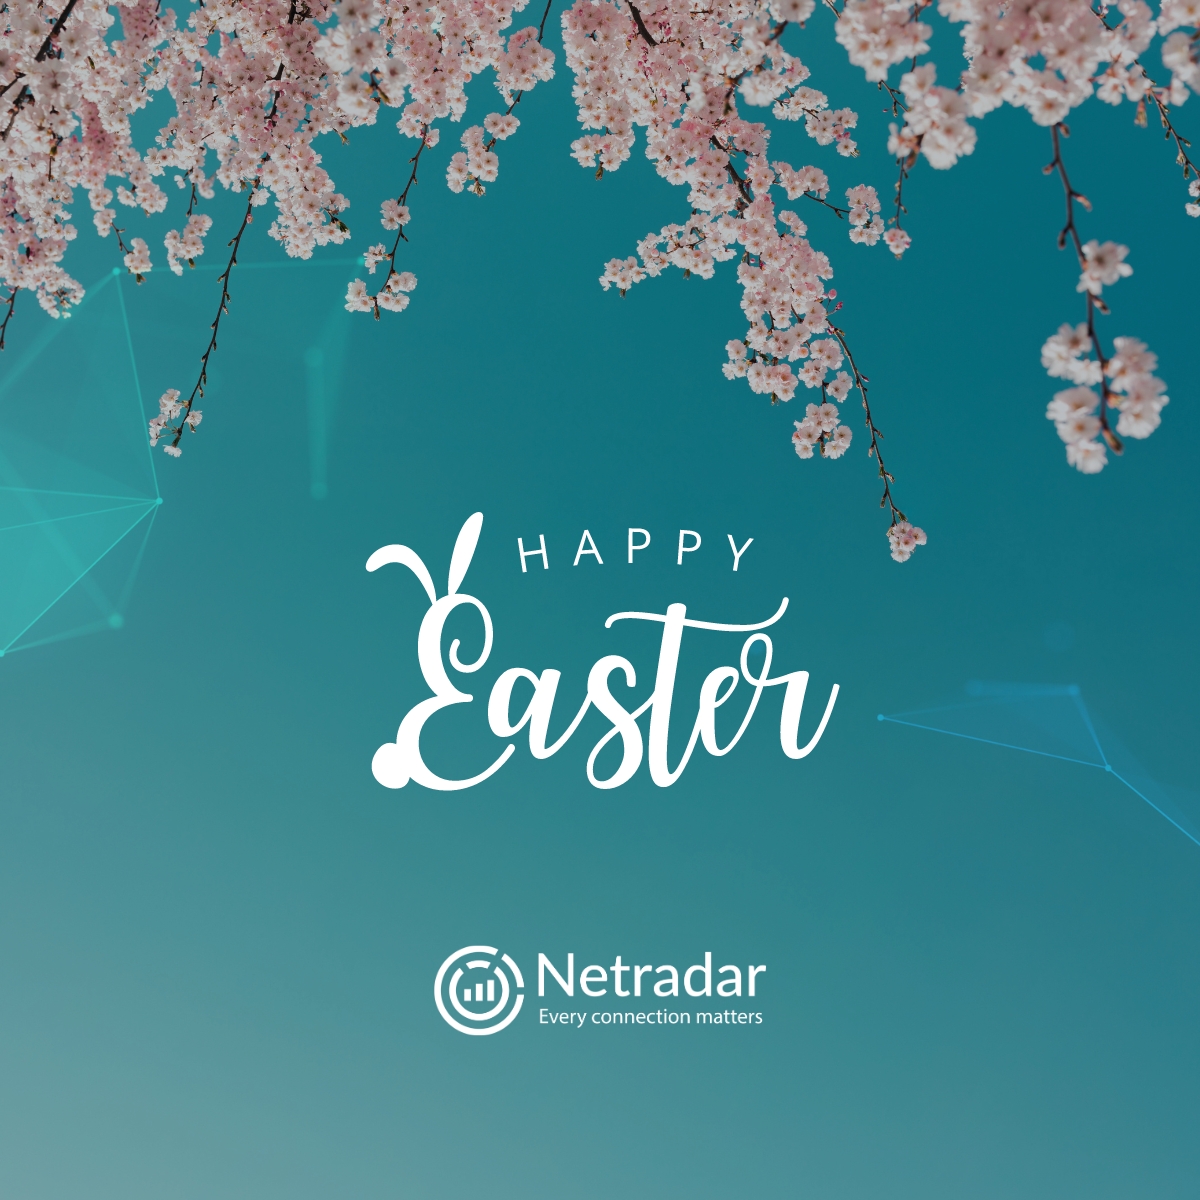 Wishing everyone a joy-filled Easter weekend from #Netradar! May this special day bring renewed hope, prosperity, and success to our valued customers, partners, and team members. Let's continue to connect everyone with innovation and intelligent solutions. #HappyEaster